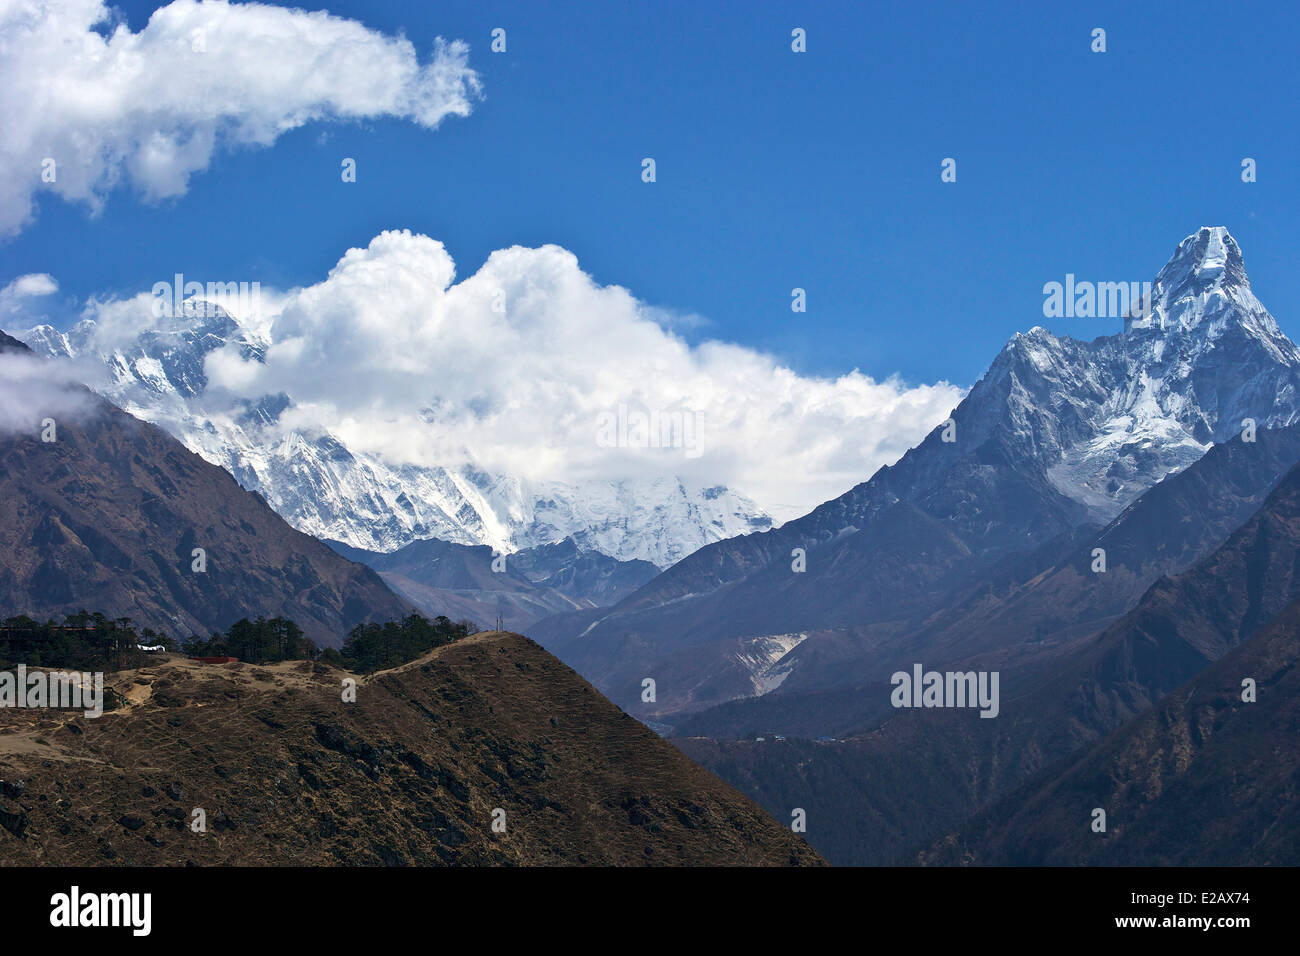 View to Mt Everest, Lhotse and Ama Dablam from the Sagarmatha National Park headquarters above Namche Bazaar, Nepal, Asia Stock Photo